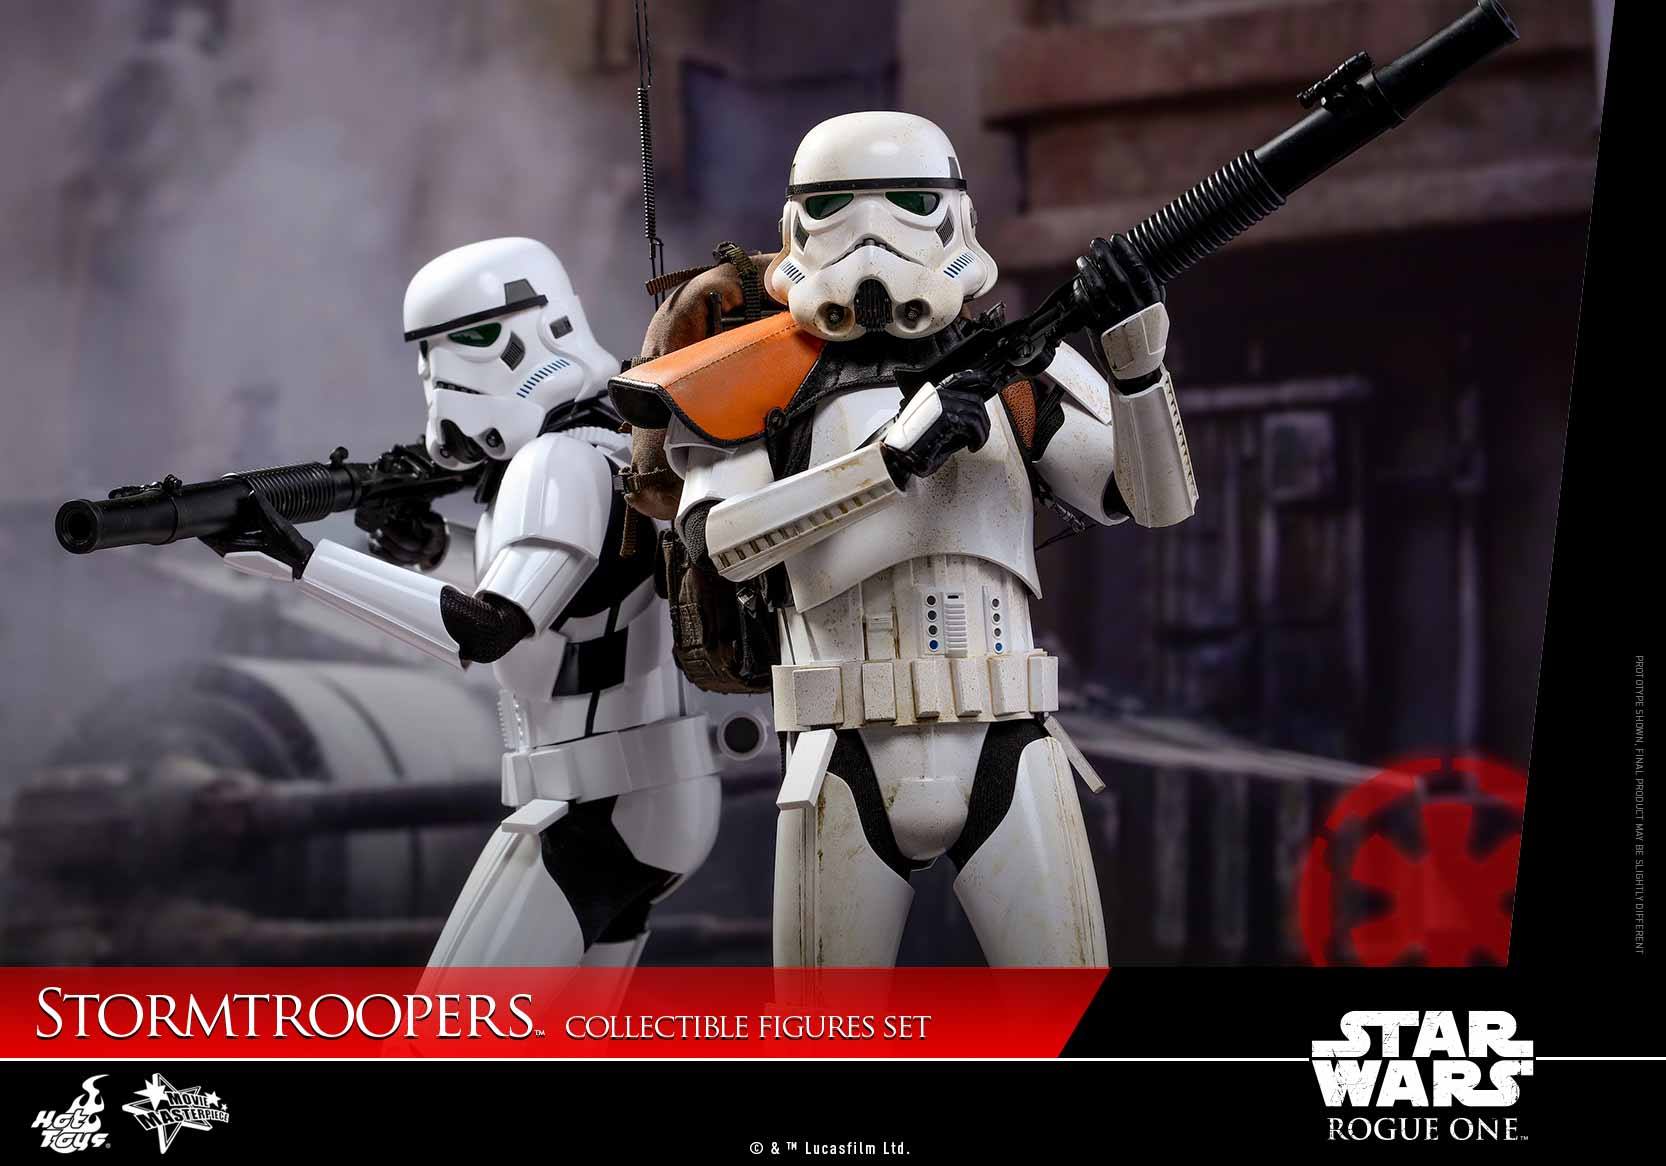 Rogue One Hot Toys - Stormtroopers Collectible Set